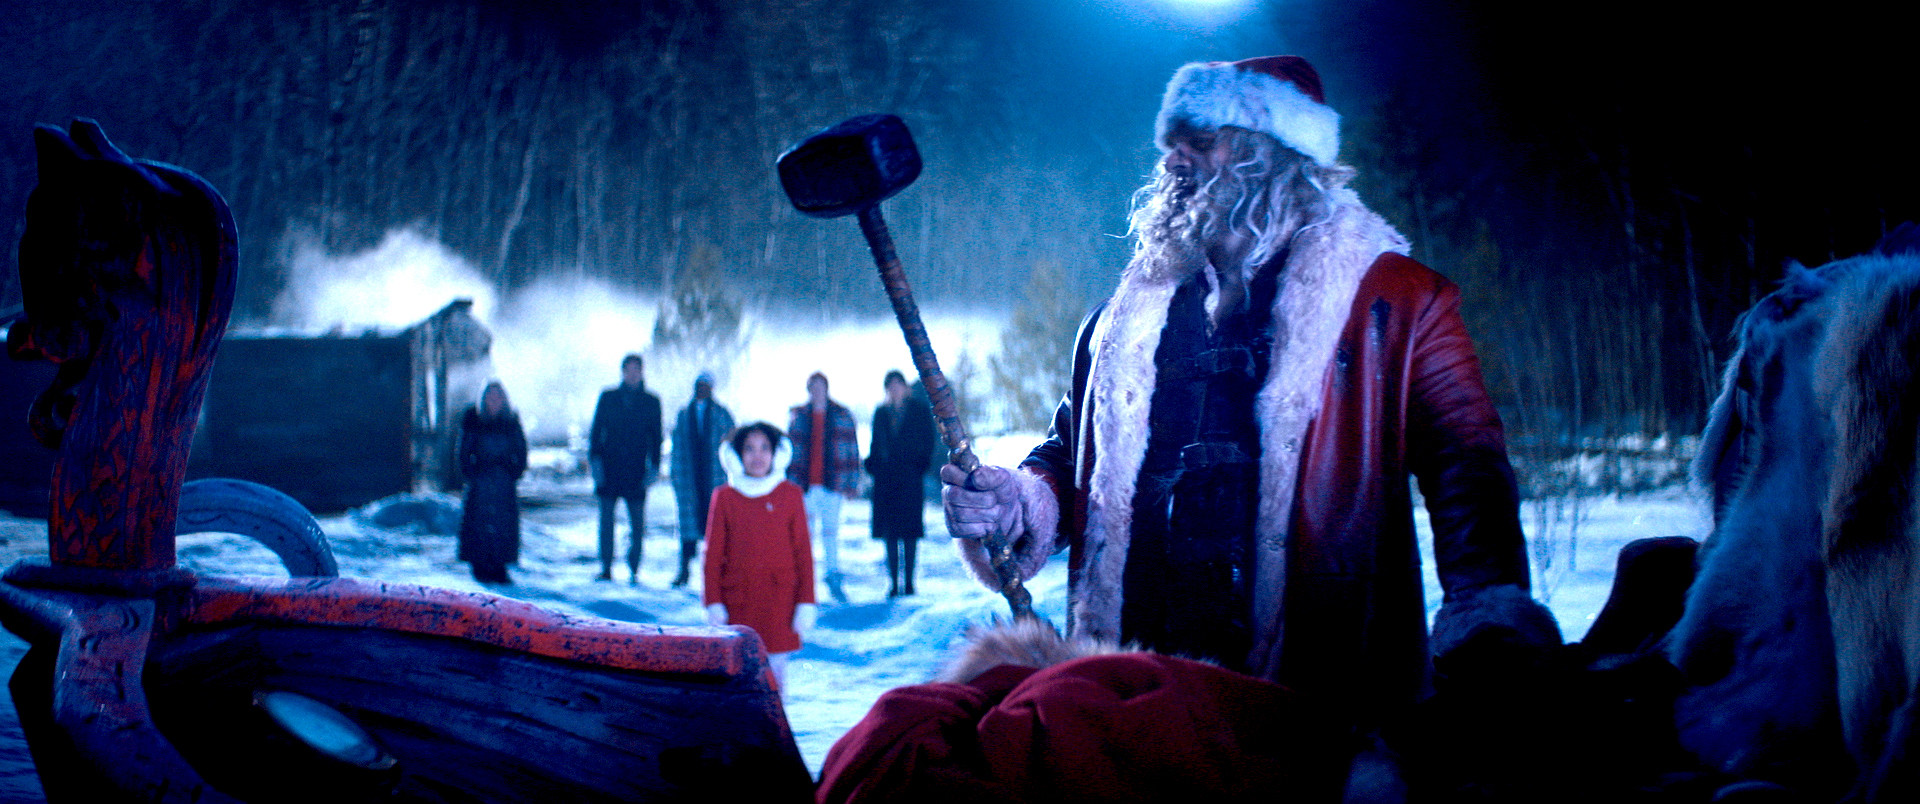 Santa Claus (David Harbour) stands in front of the silhouette of his sleigh outdoors at night, holding up a sledgehammer as a crowd looks on in Violent Night